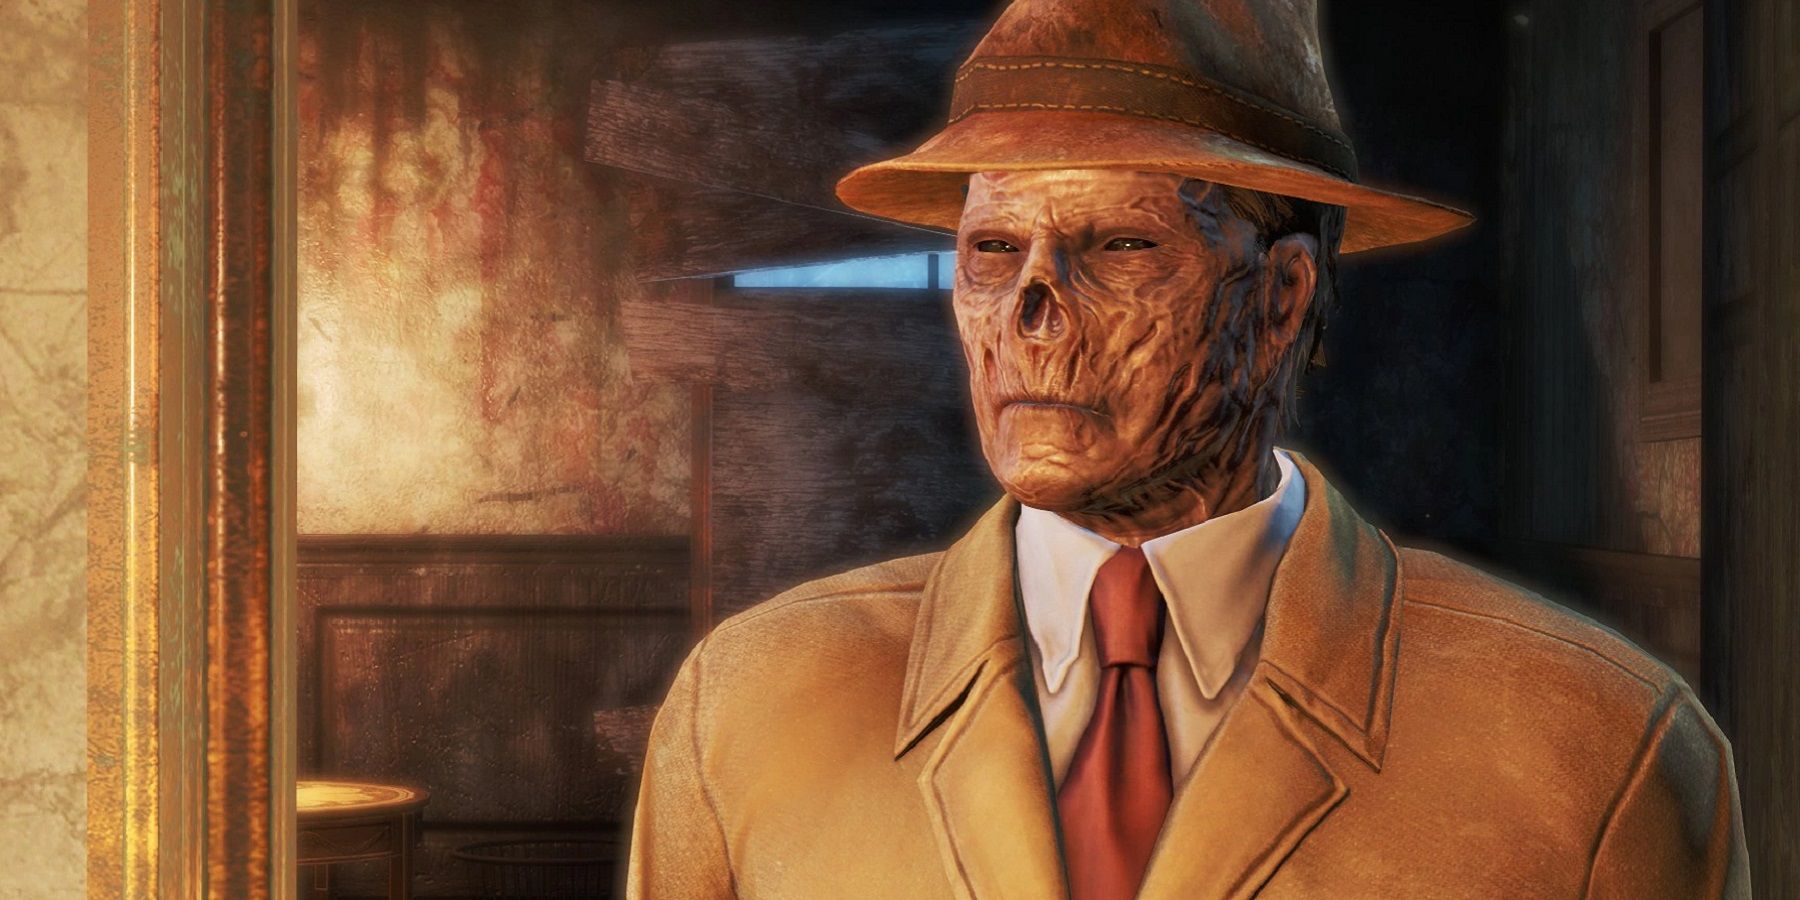 Image from Fallout 4 showing a ghoul in a trilby.